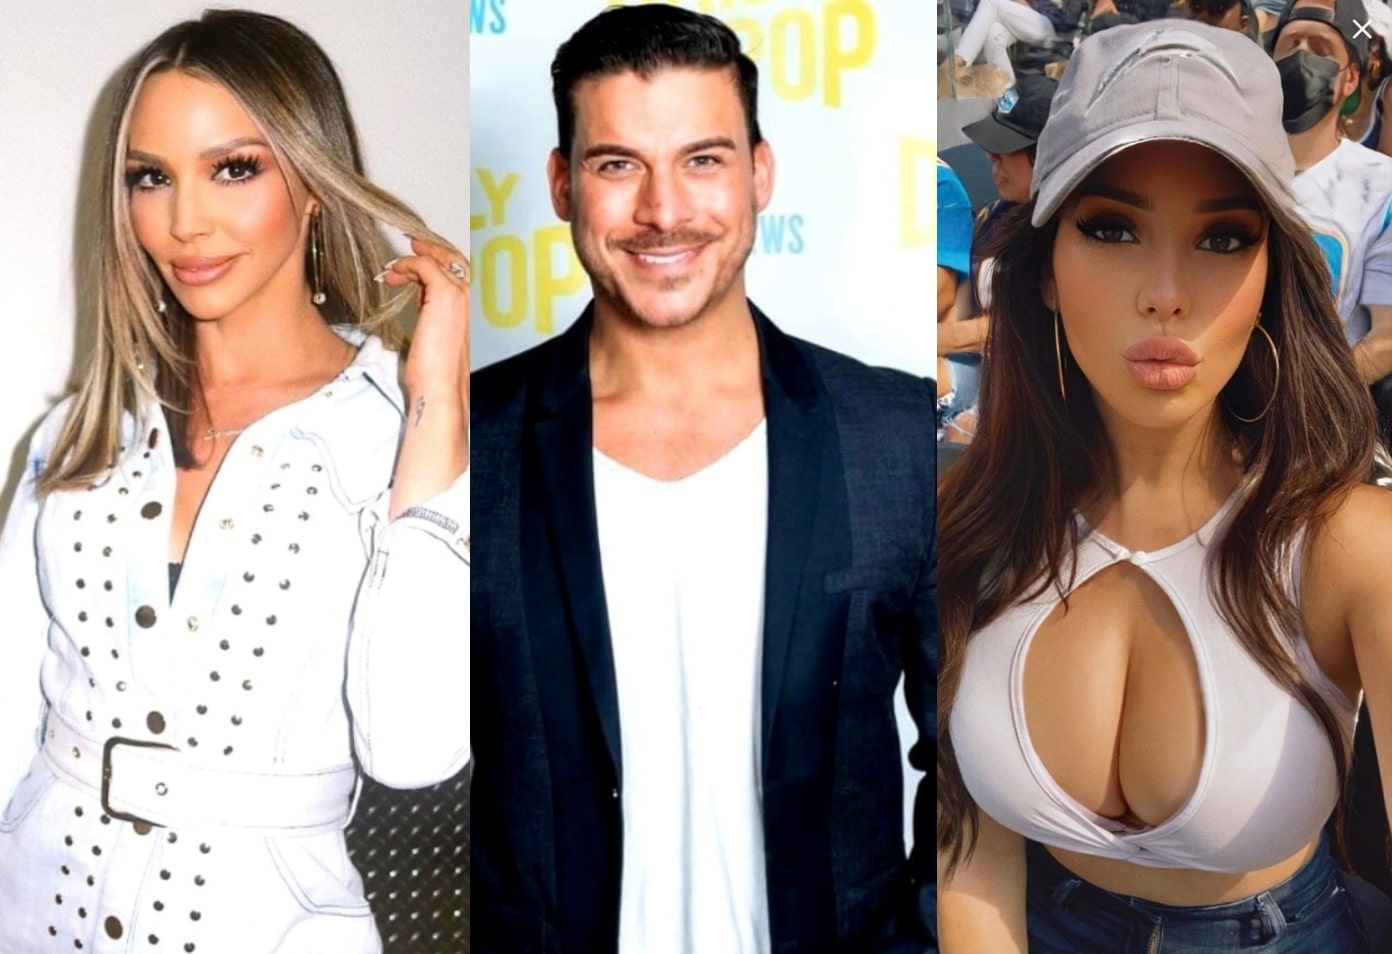 Scheana Shay Shares How Jax Taylor Met Paige Woolen, Her History With the IG Model, and Her "I'm Pregnant" Joke, Plus "WTF" Comment to Jax's Publicist Lori K.